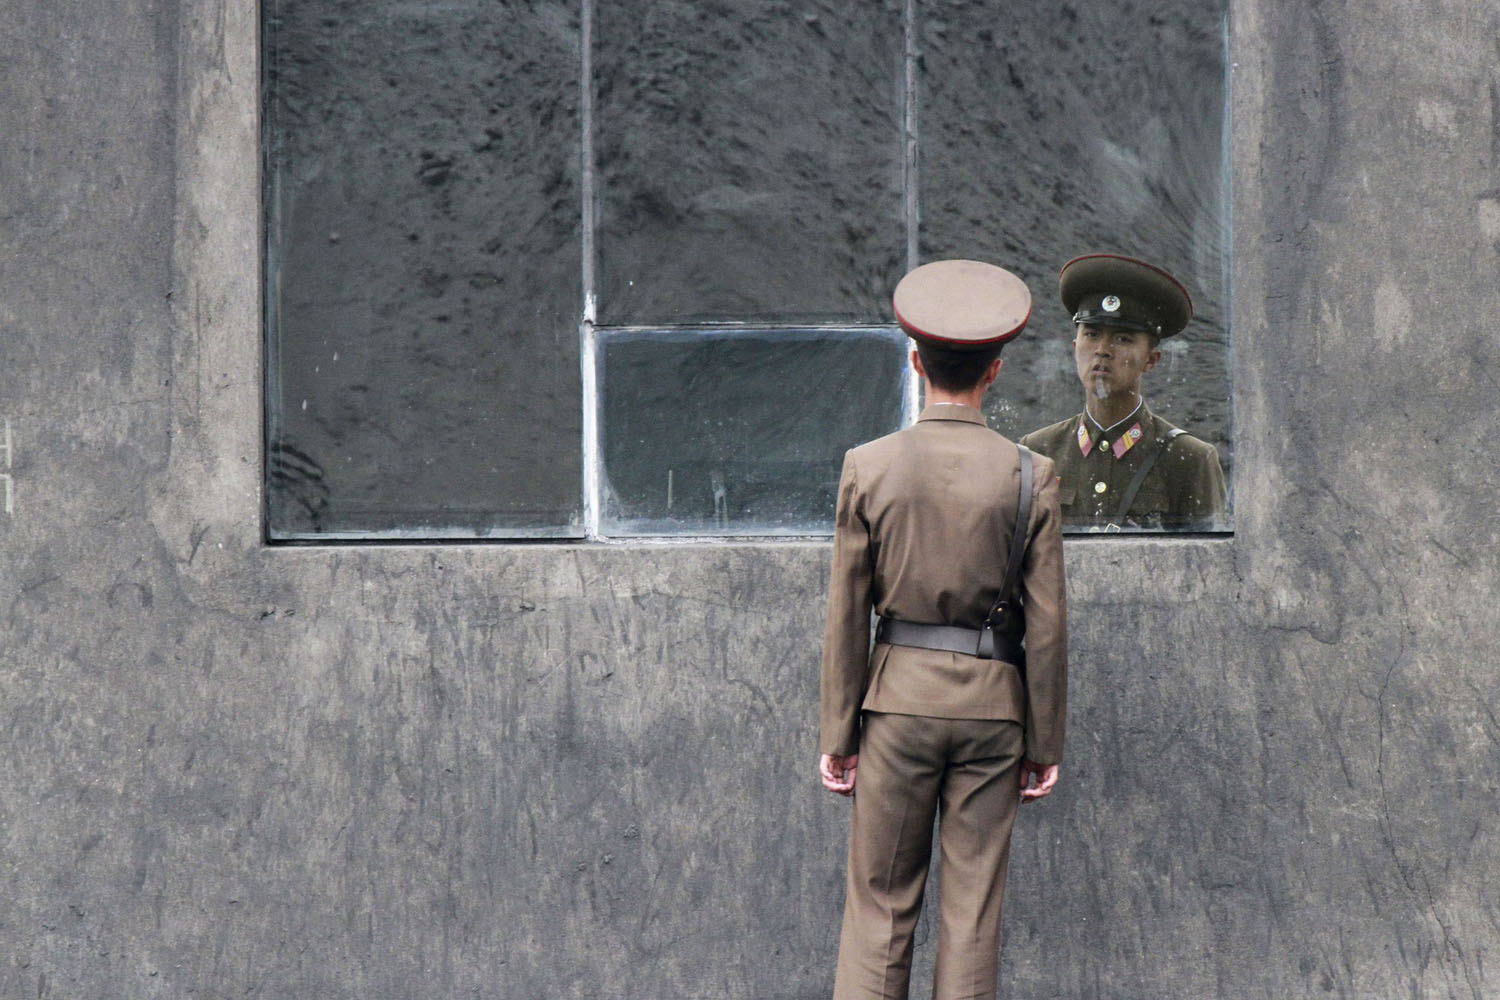 A North Korea soldier stands in front of a window along the banks of Yalu River near the North Korean town of Sinuiju, opposite the Chinese border city of Dandong